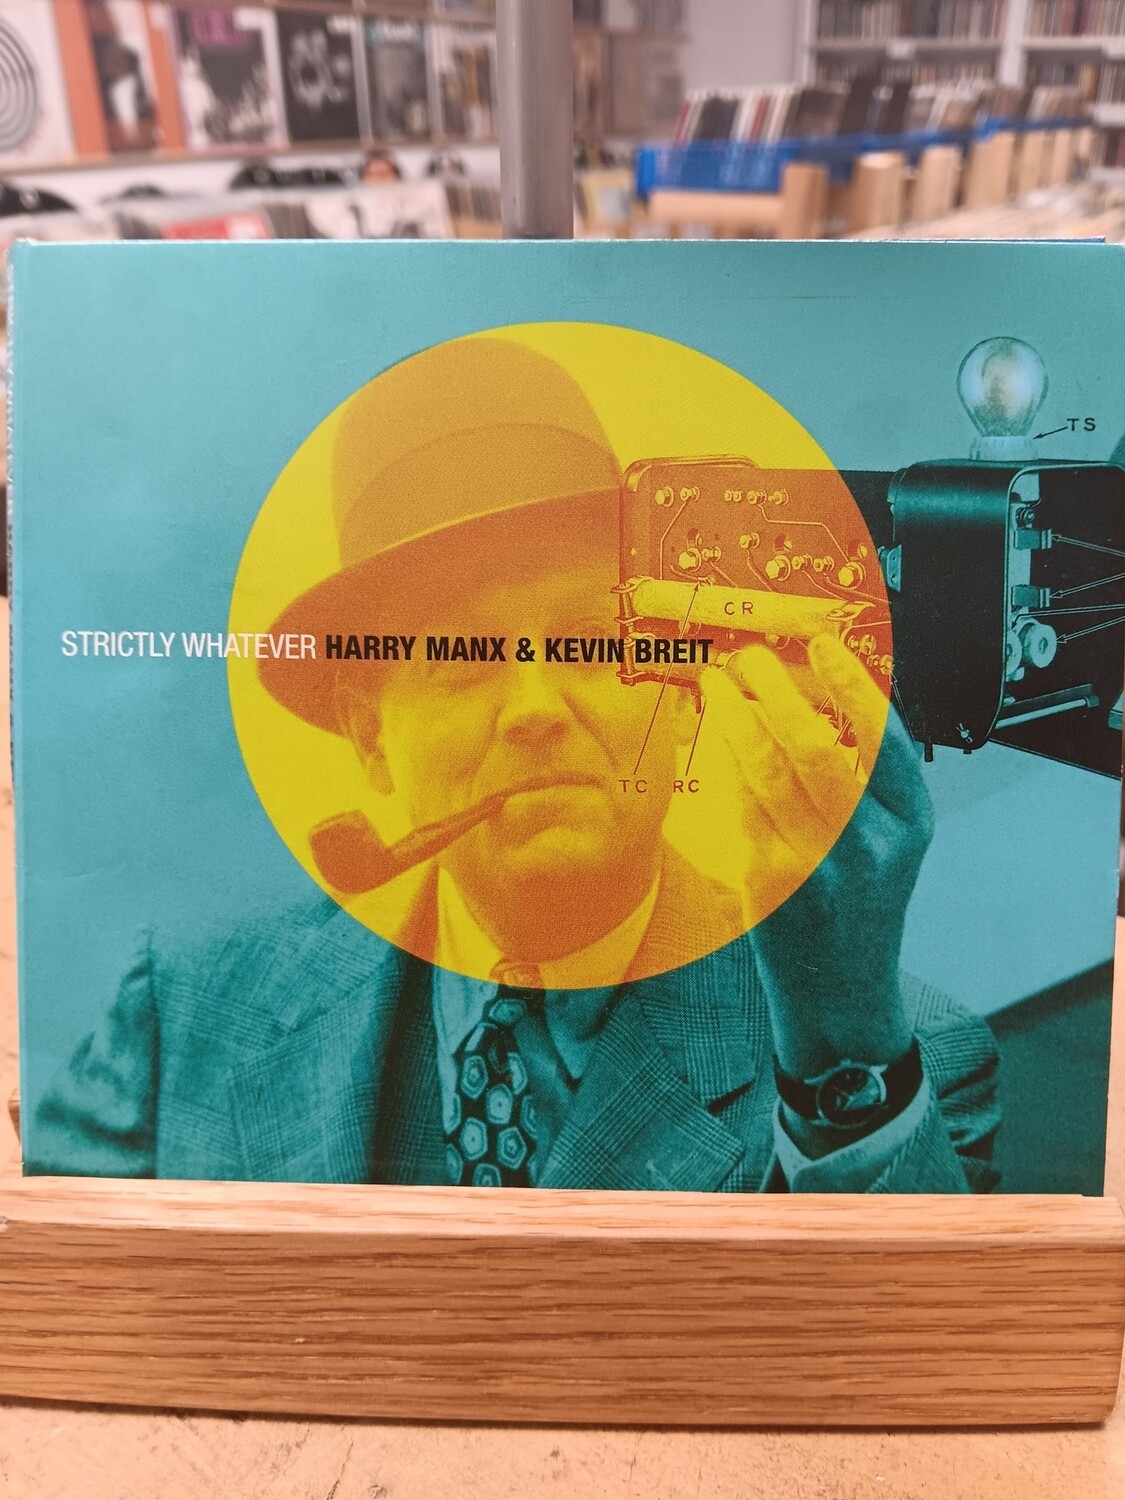 HARRY MANX & KEVIN BREIT - Strictly whatever (CD)